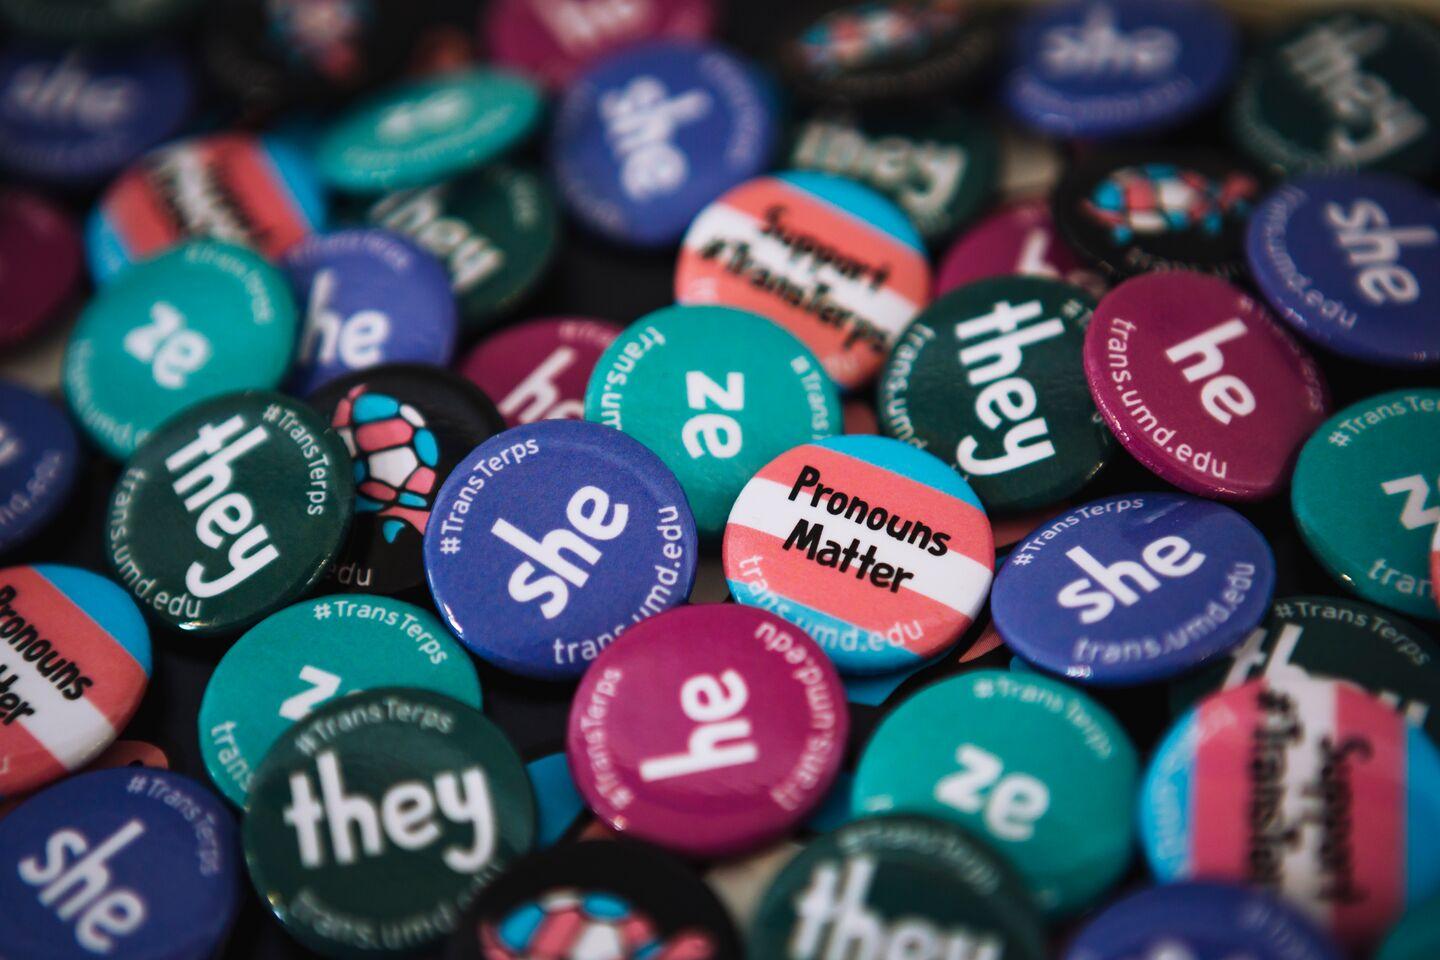 A pile of buttons in support of proper pronoun usage distributed by the Lesbian, Gay, Bisexual, and Transgender Equity Center.